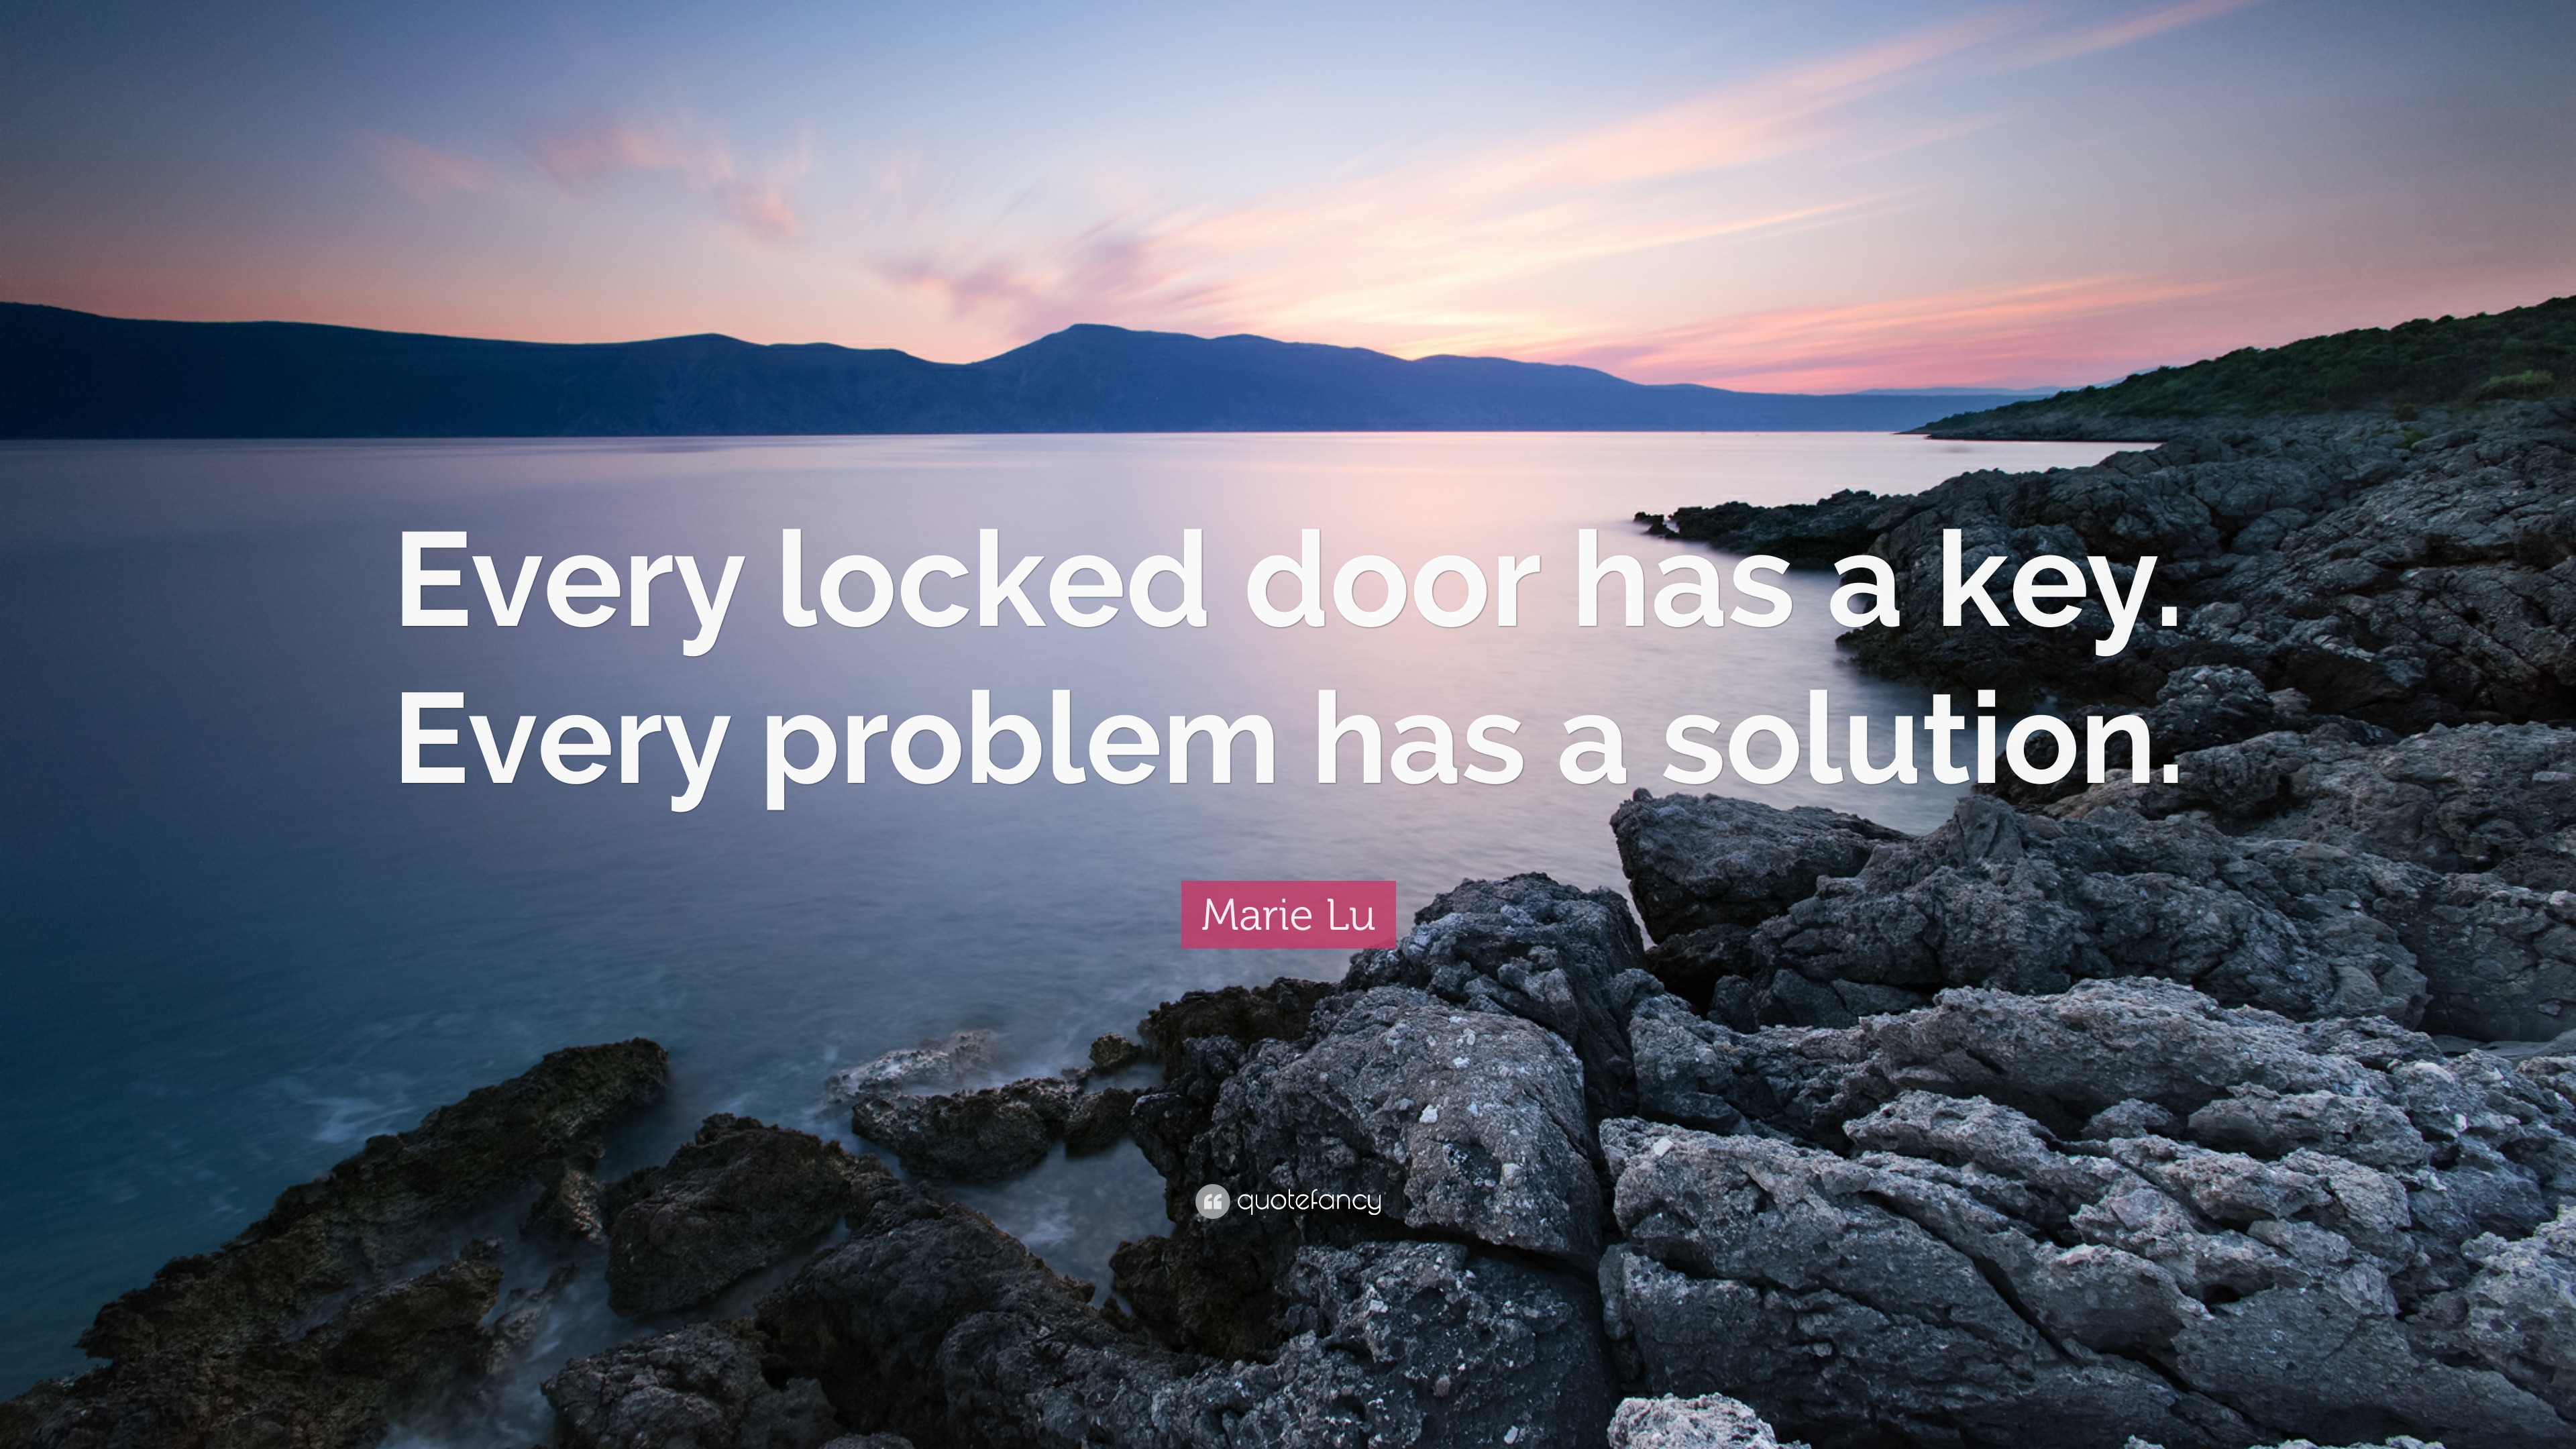 Marie Lu Quote: “Every locked door has a key. Every problem has a solution.”